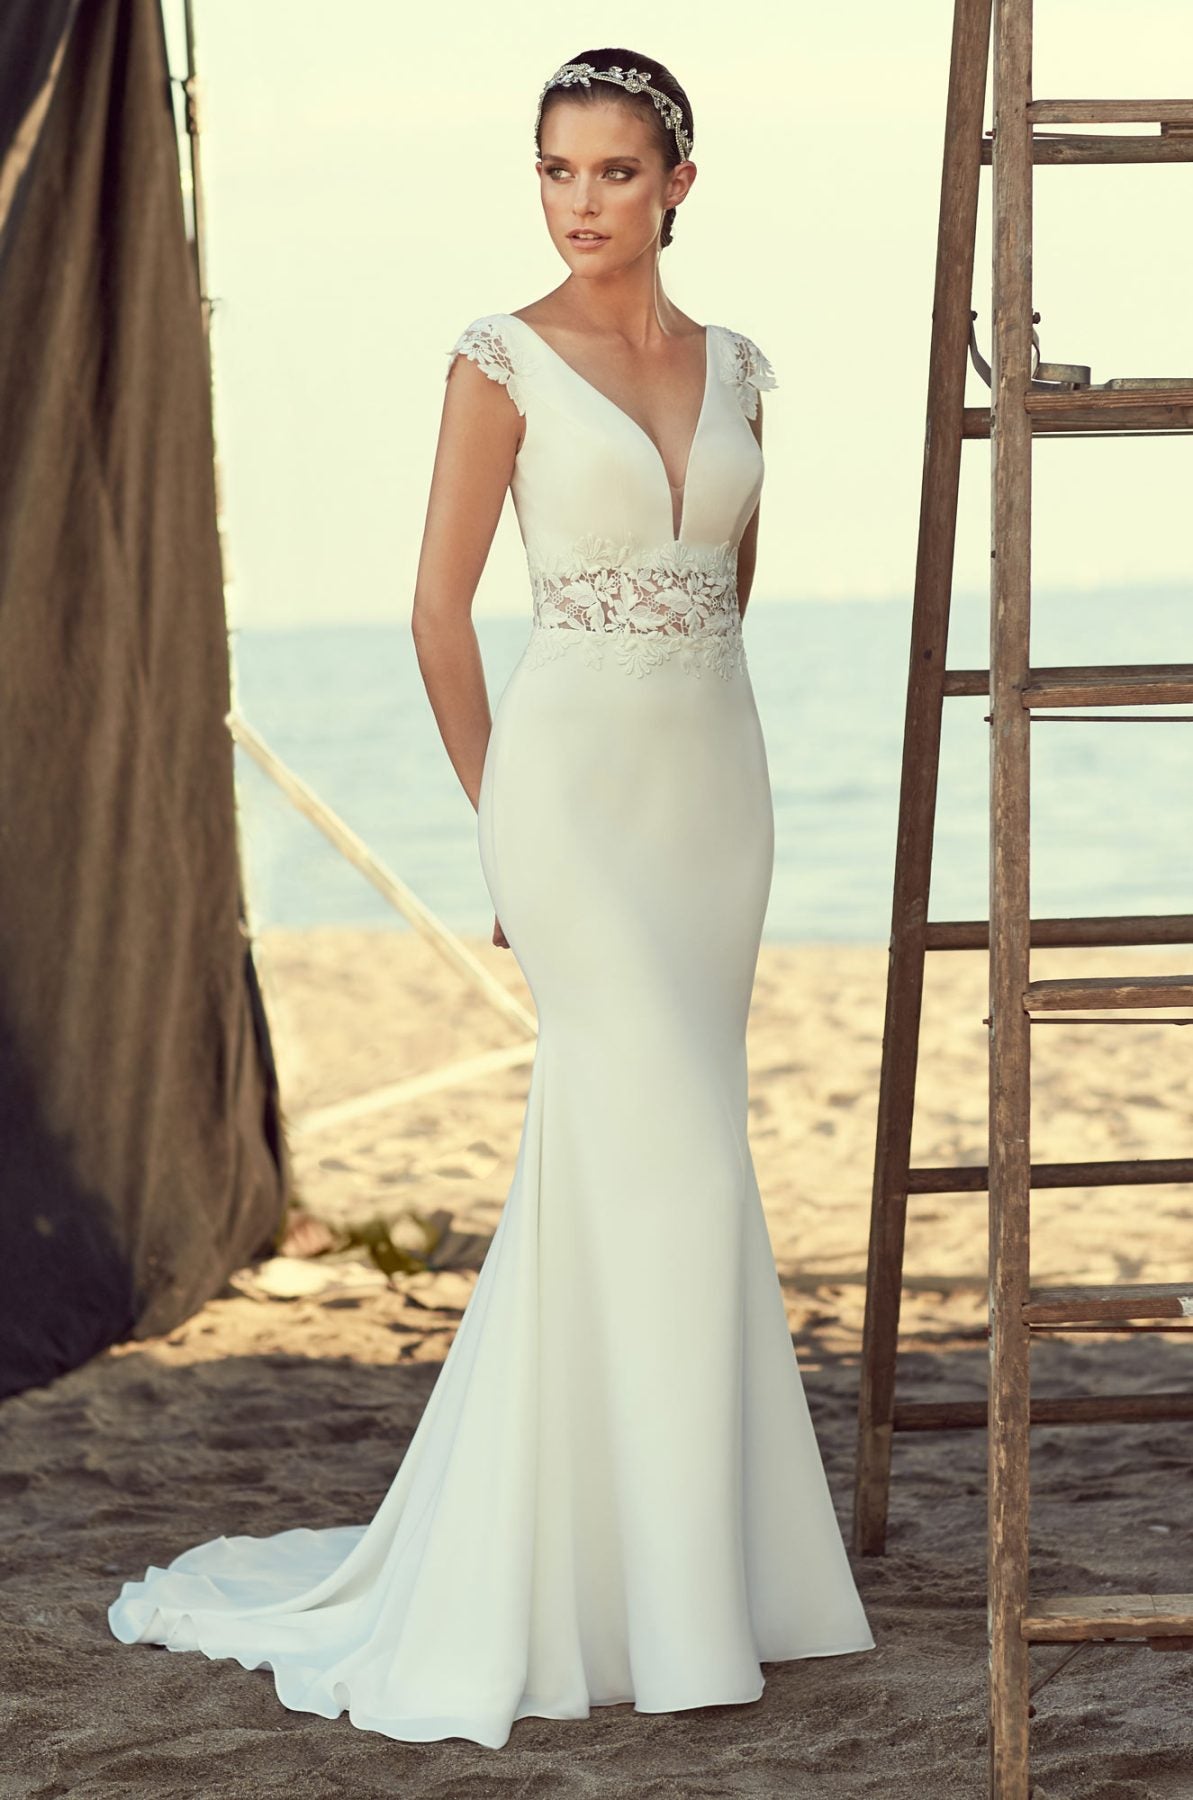 mikaella-v-neck-cap-sleeve-lace-waist-detail-fit-and-flare-wedding-dress-33771858-1193x1800.jpg